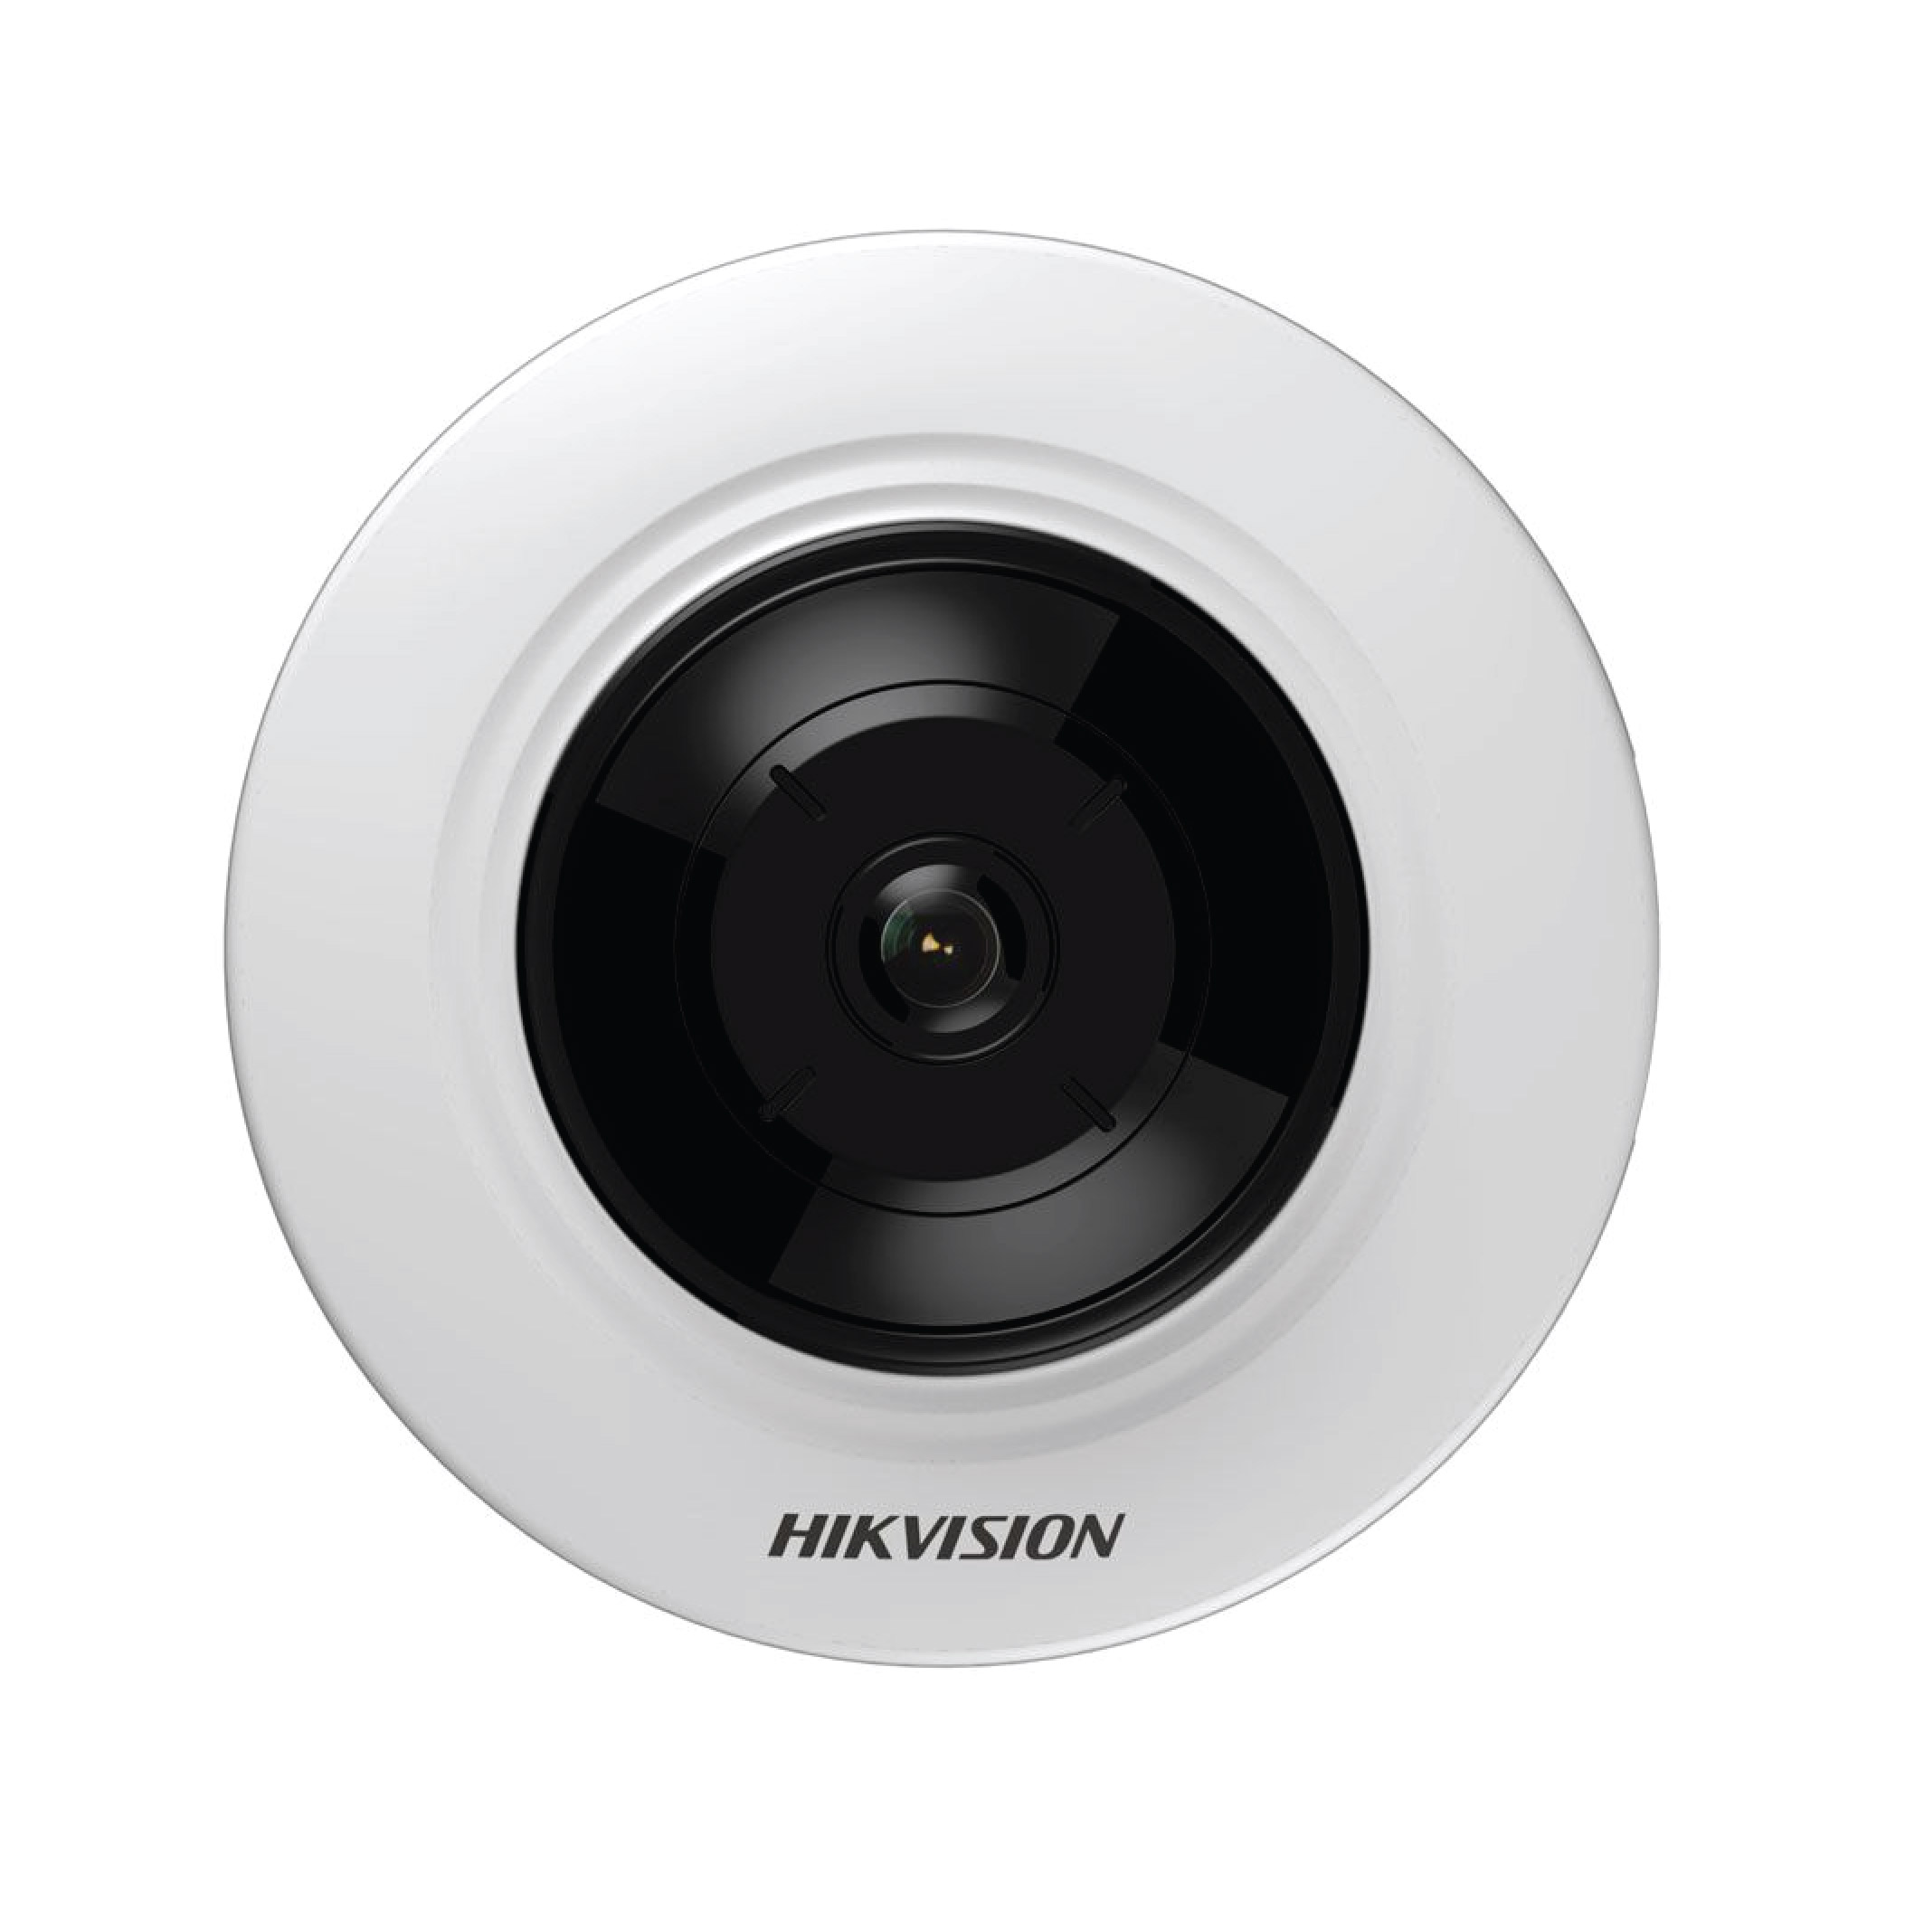 HIKVISION DS-2CD2955FWD-I Turbo HD Camera